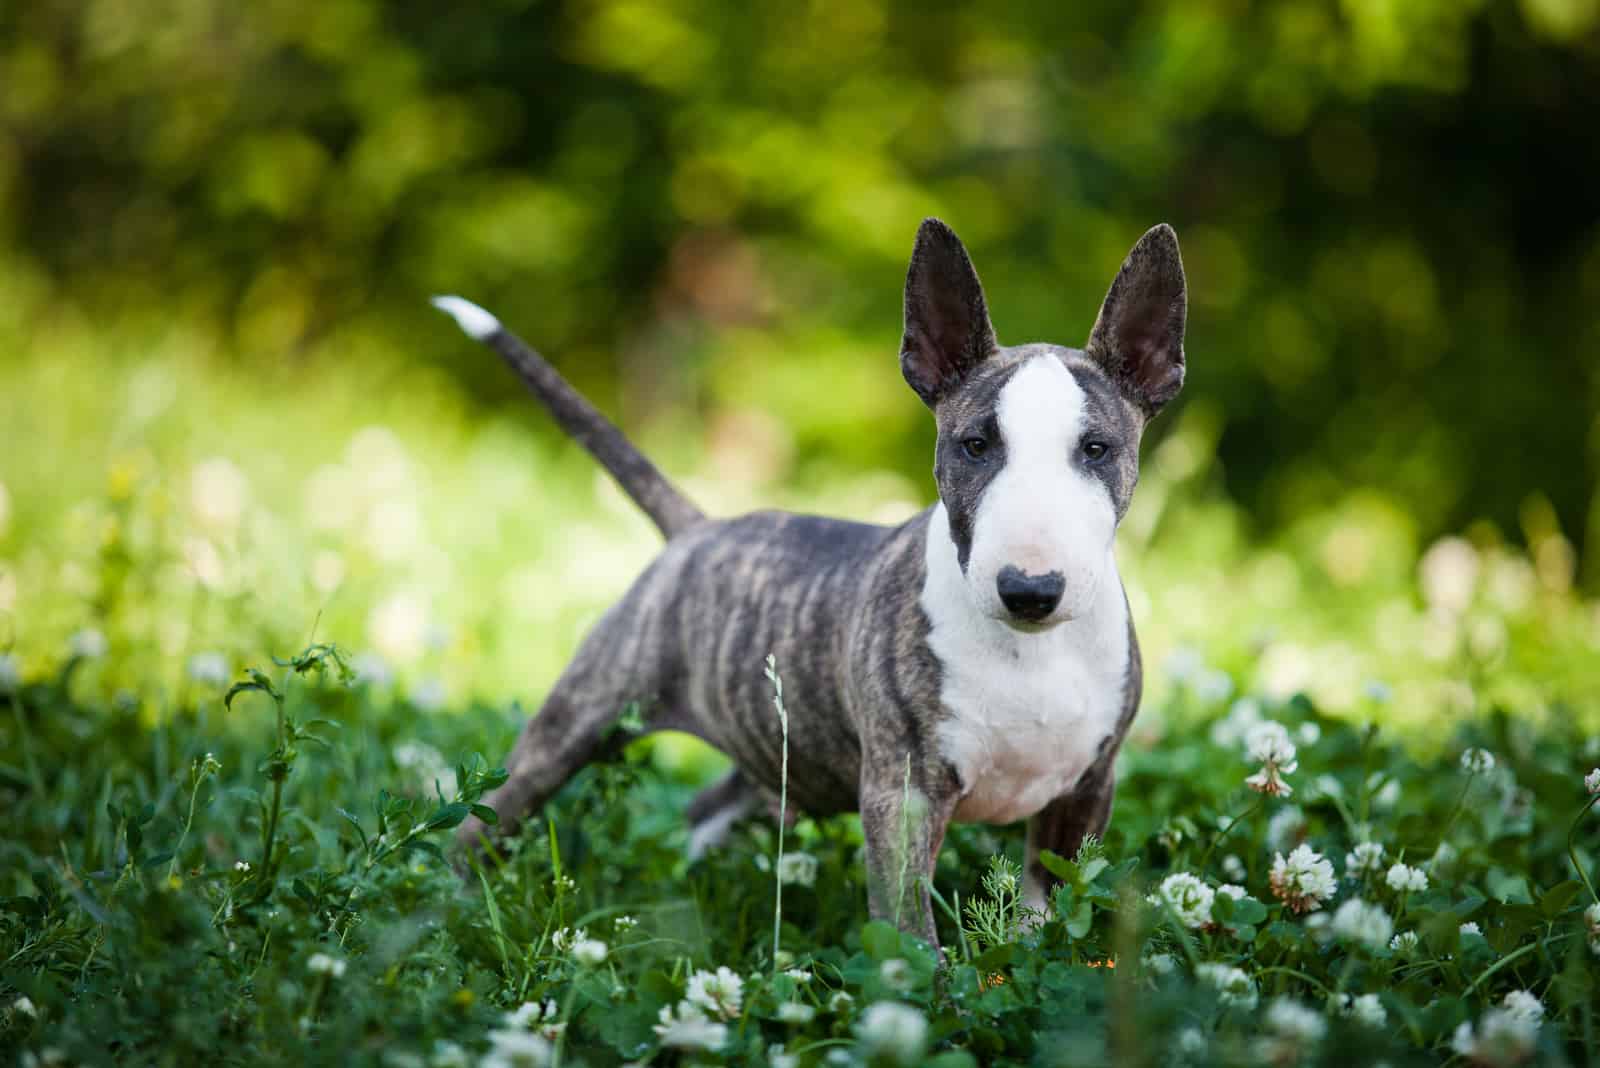 The Miniature Bull Terrier stands in green grass